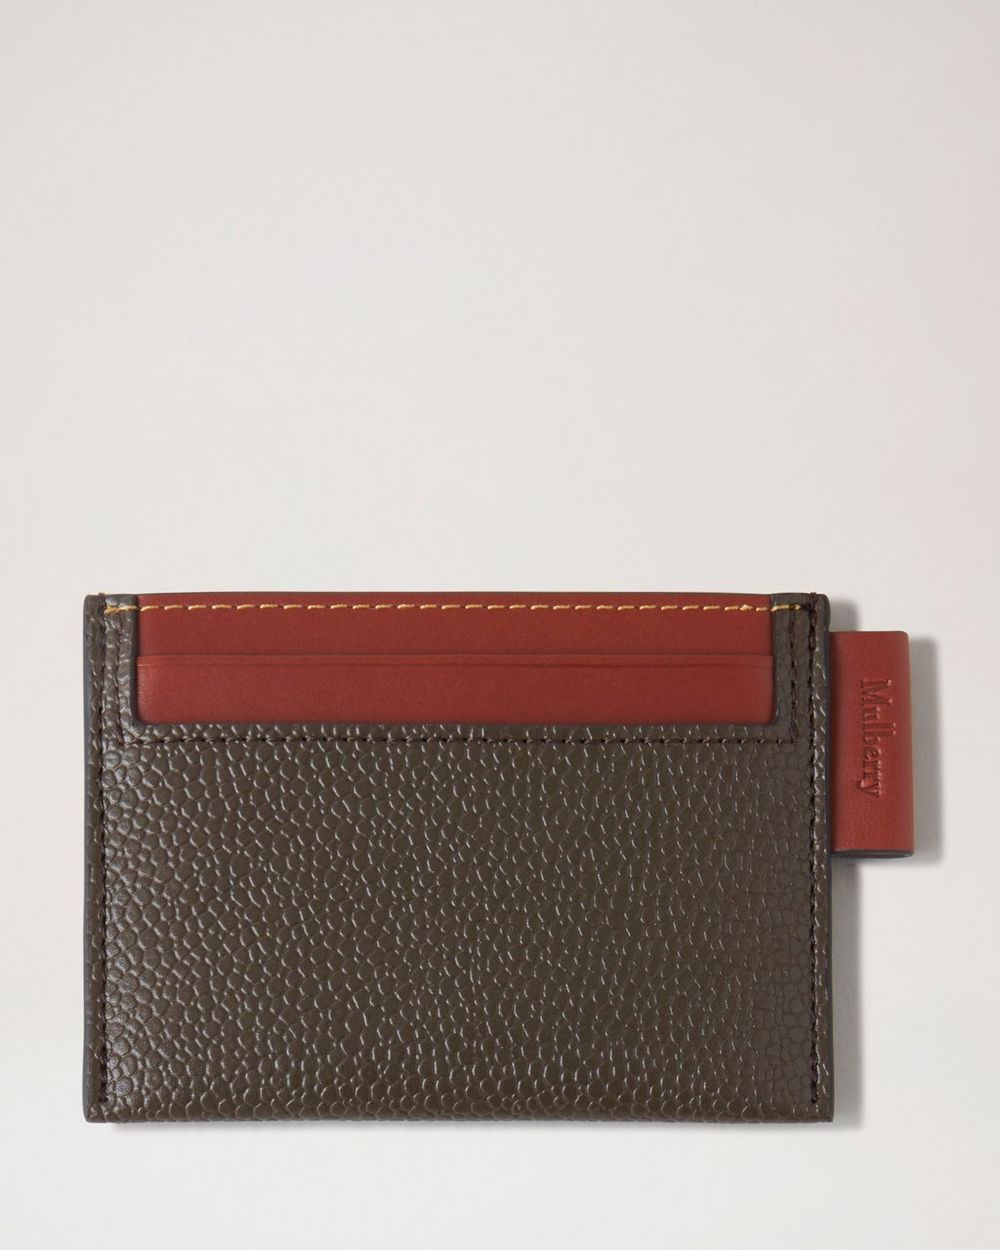 Flat Leather Card Case, Red, Flat Card Holders